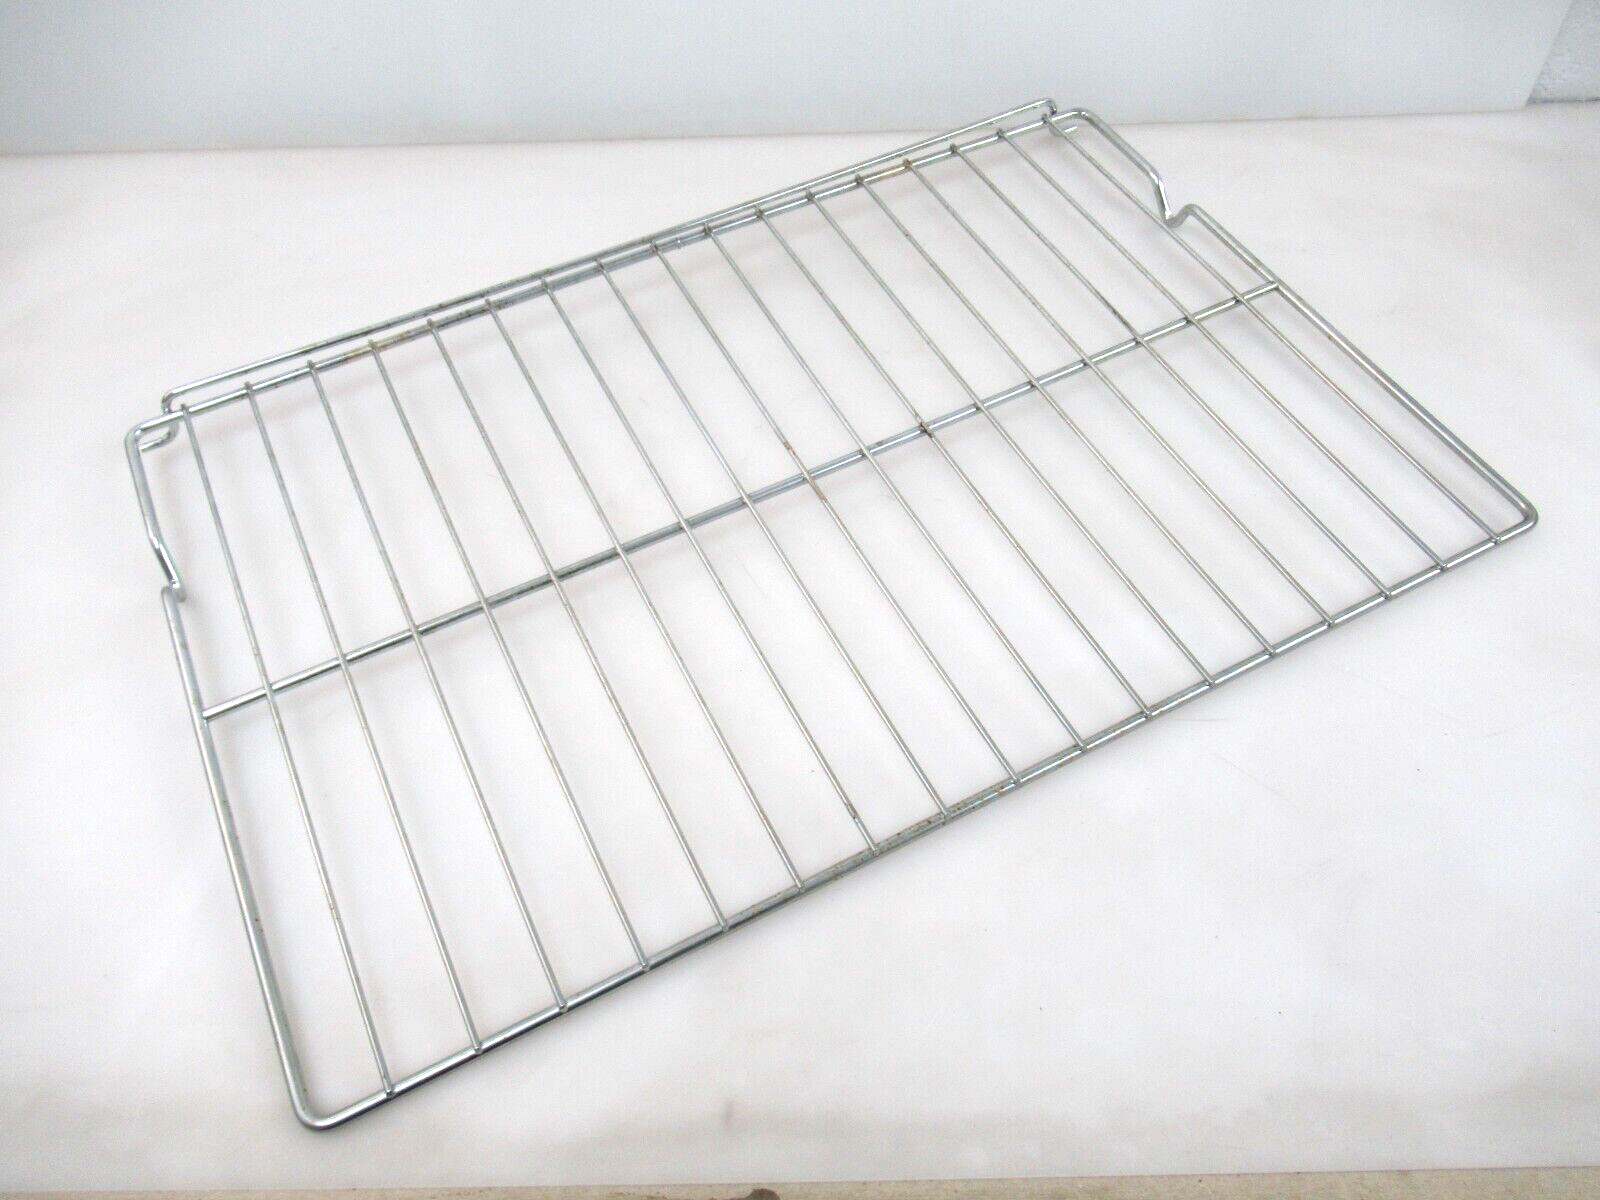 14-38-907-01  Thermador 30" Oven ( 24 1/4" x 15 1/2" ) Rack  14-38-907-01 - $61.44